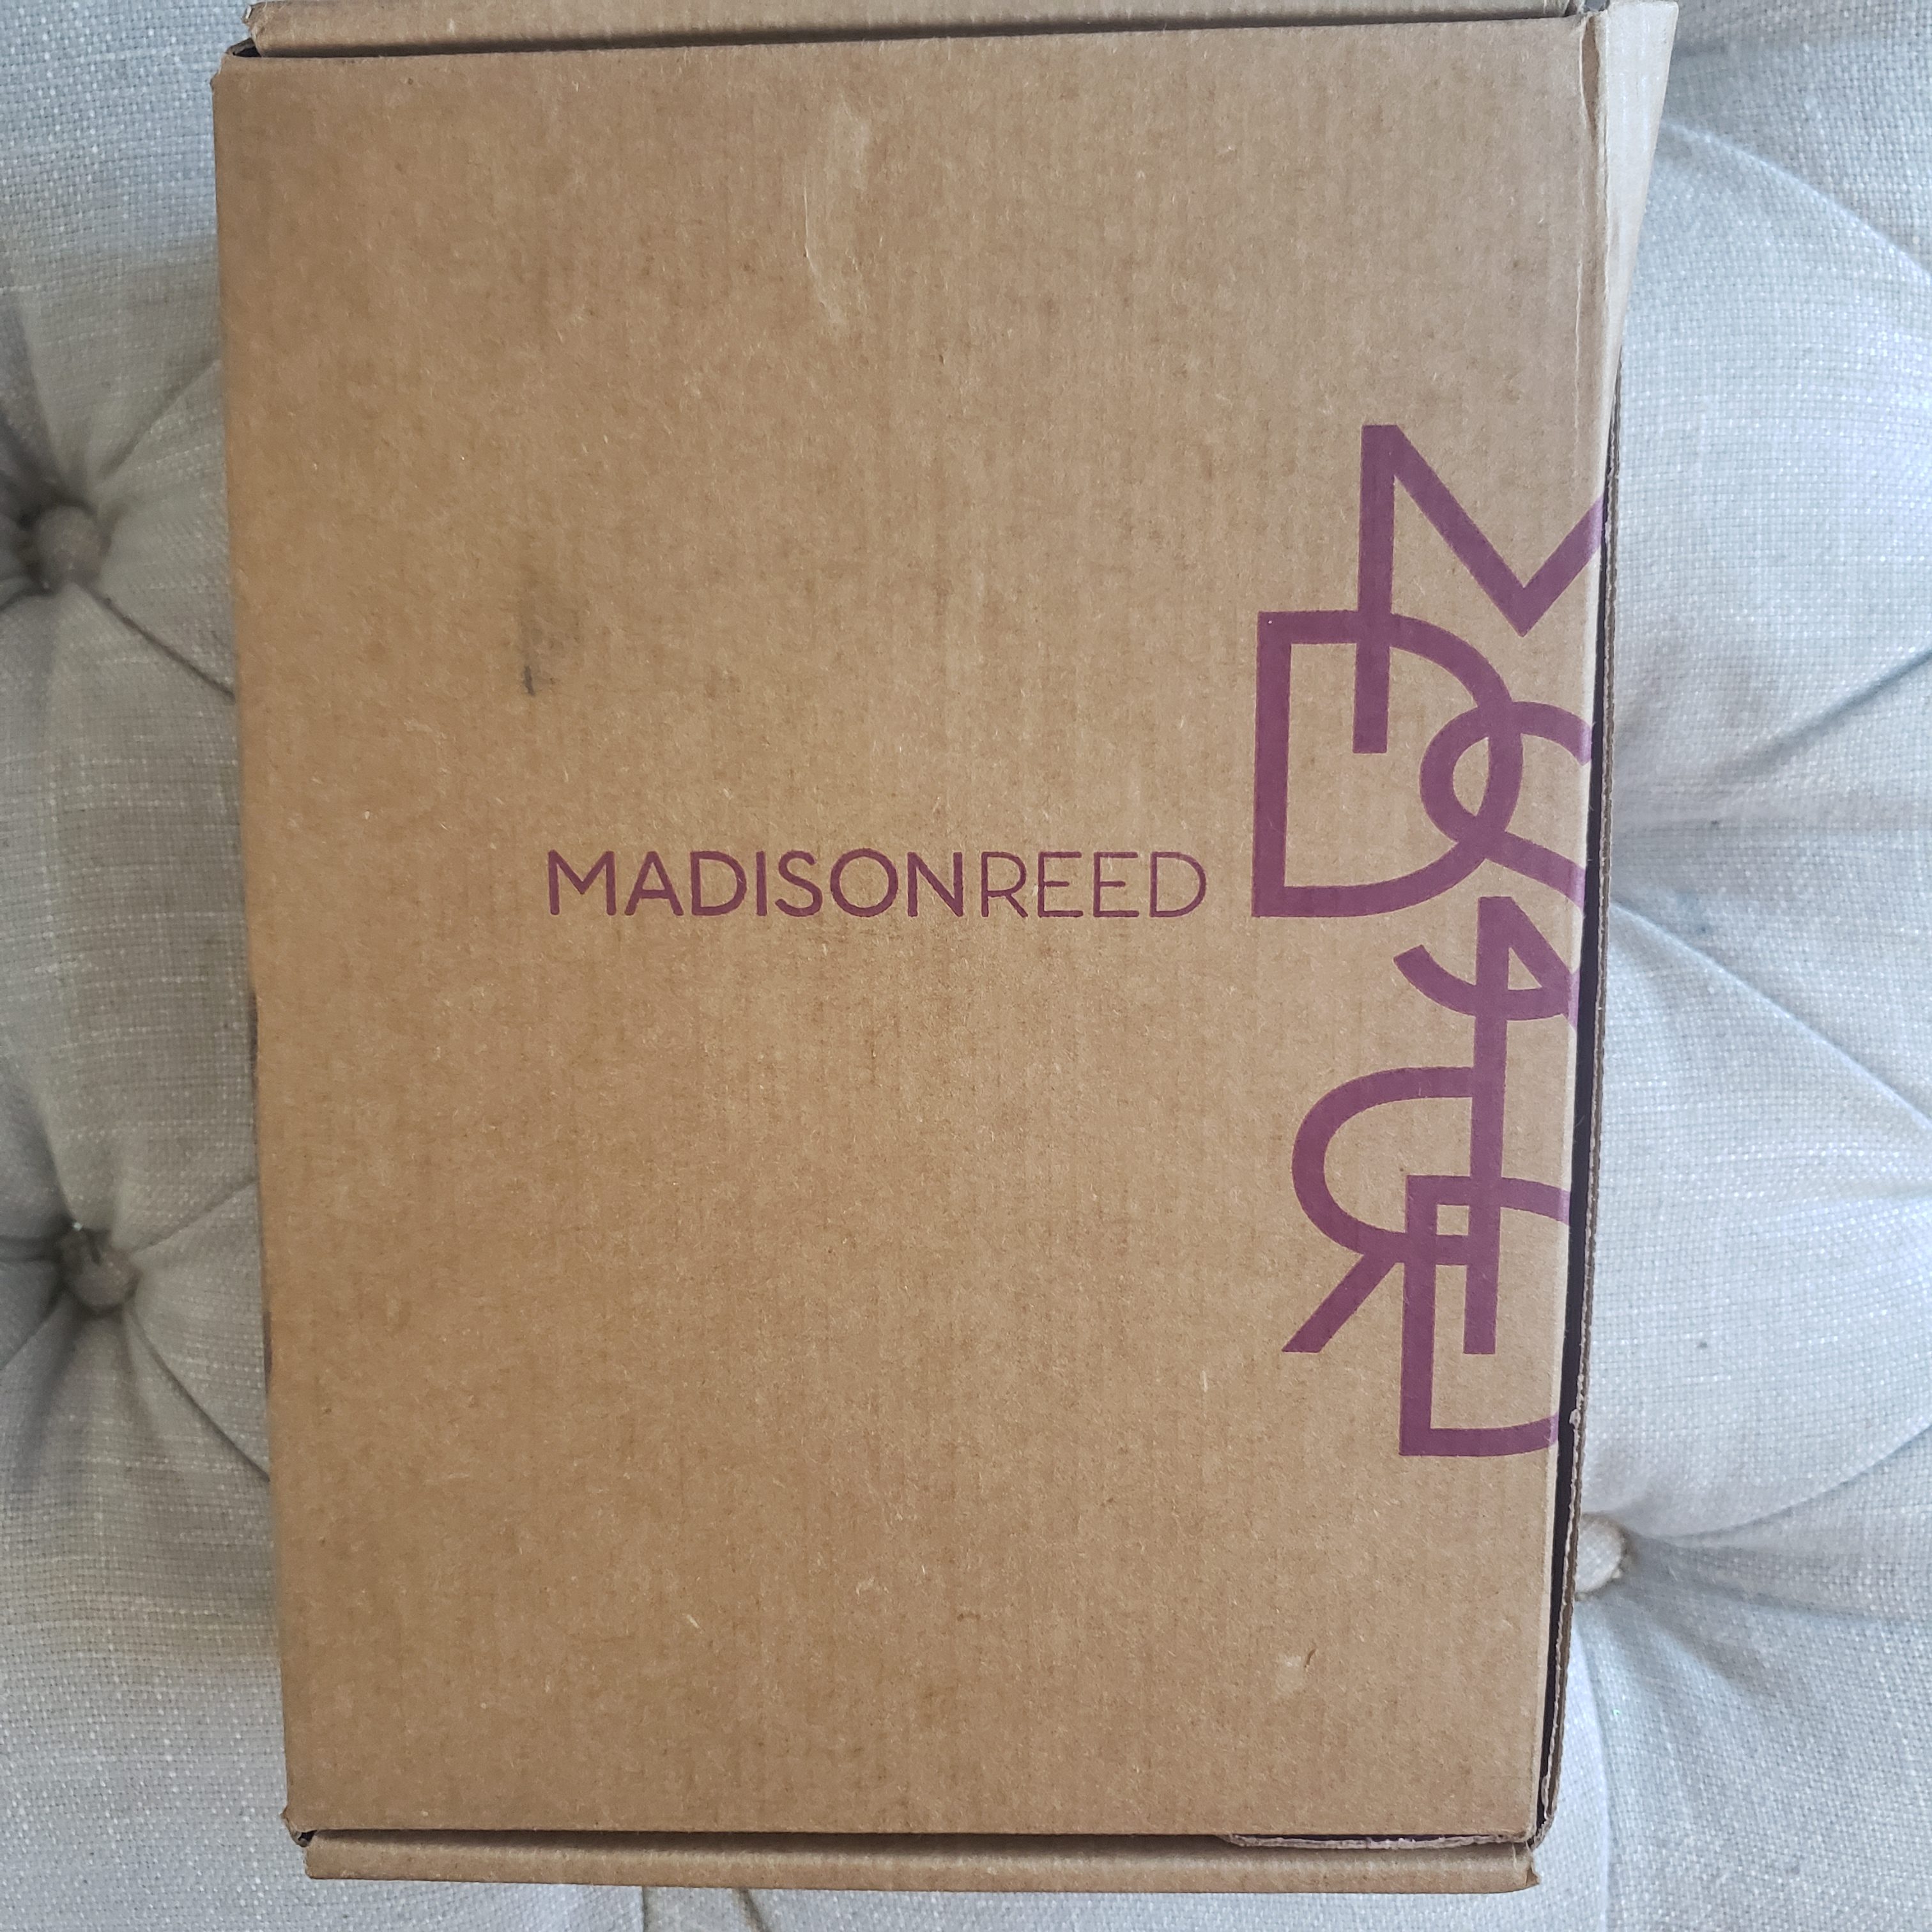 A package from Madison Reed